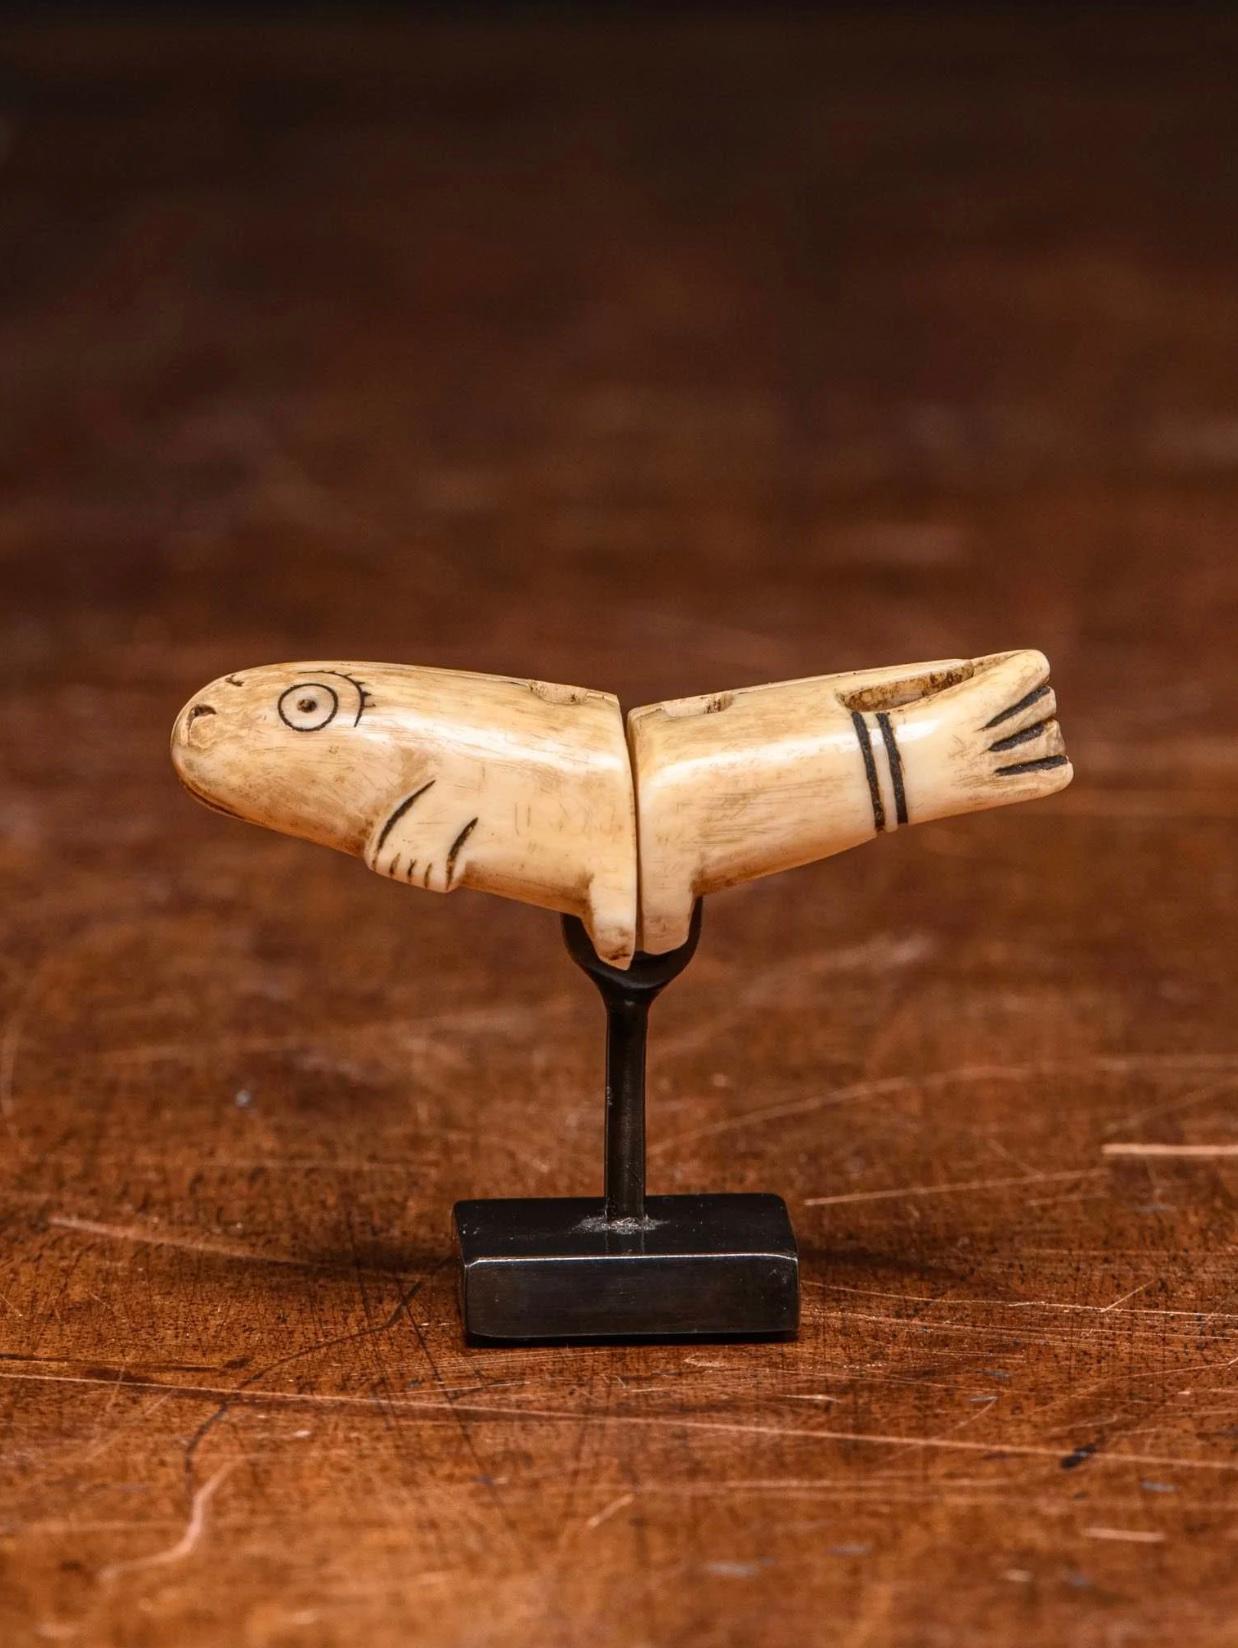 A pair of Inuit Marine Ivory charmes, Inuit People,Alaska

Marine ivory Double Knot Charm,Inuit People,Alaska.
Two piece Charm forming a Whale.
Made to fit stand.

7 x 4.4 x 2.7 cm
2 3/4 x 1 3/4 x 1 in